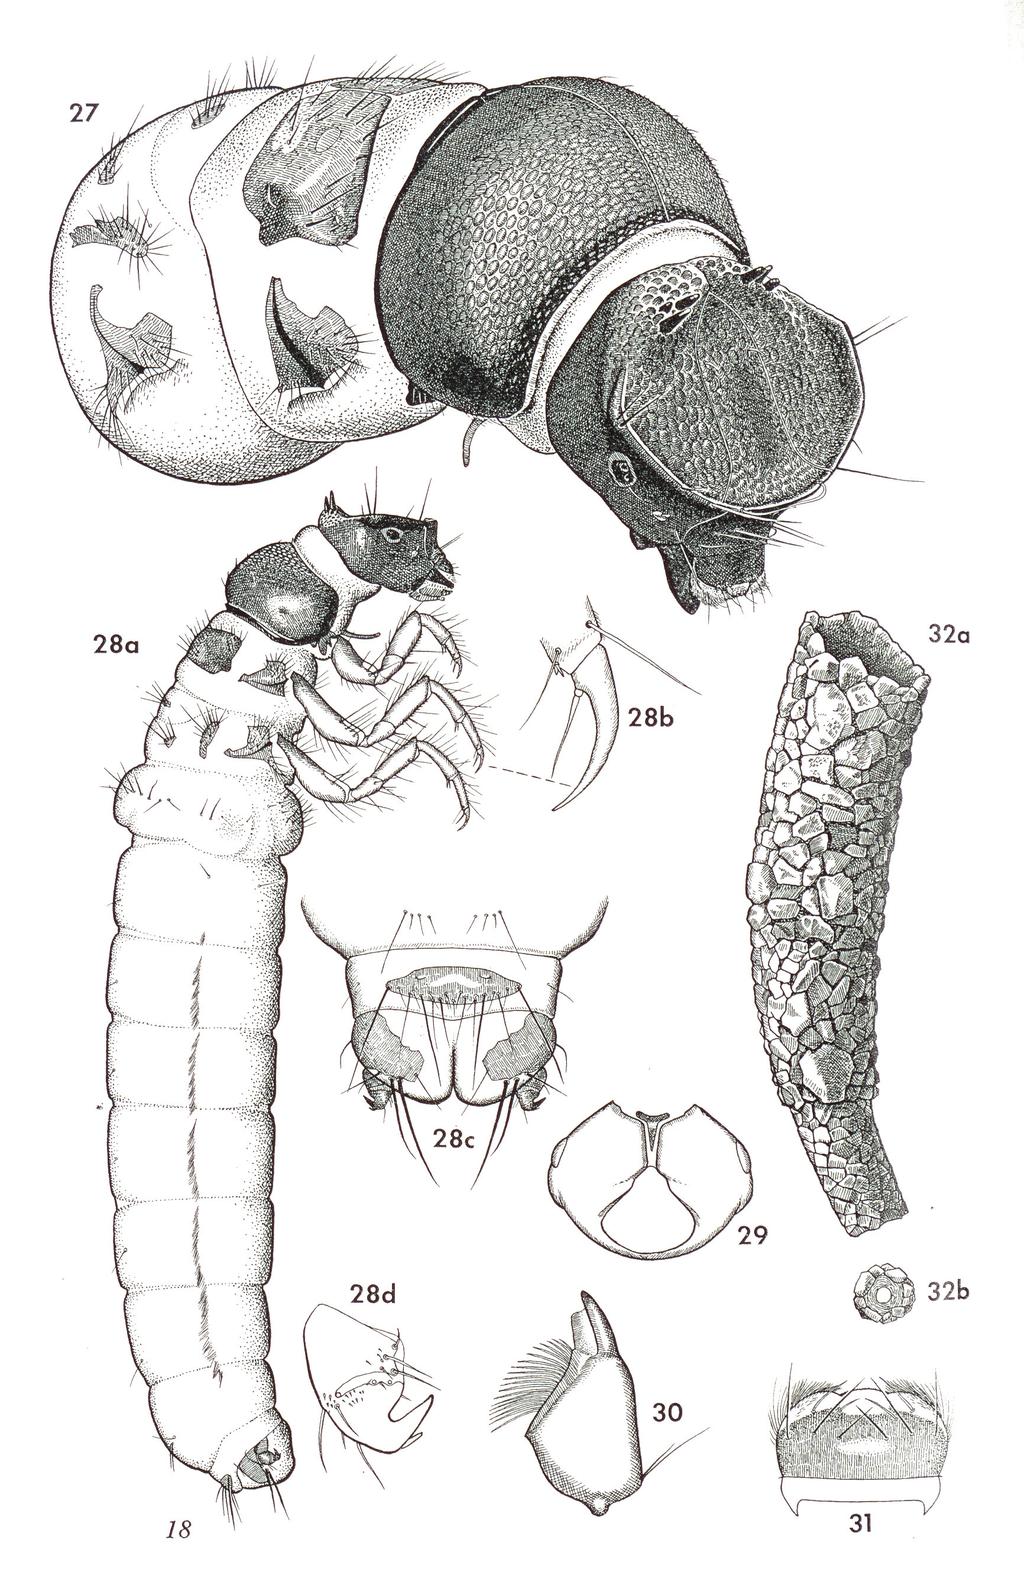 Larval stages are 7.0-8.9 mm in length with prominent horns above a flattened area of the head. A medial carina arises on the flattened area.